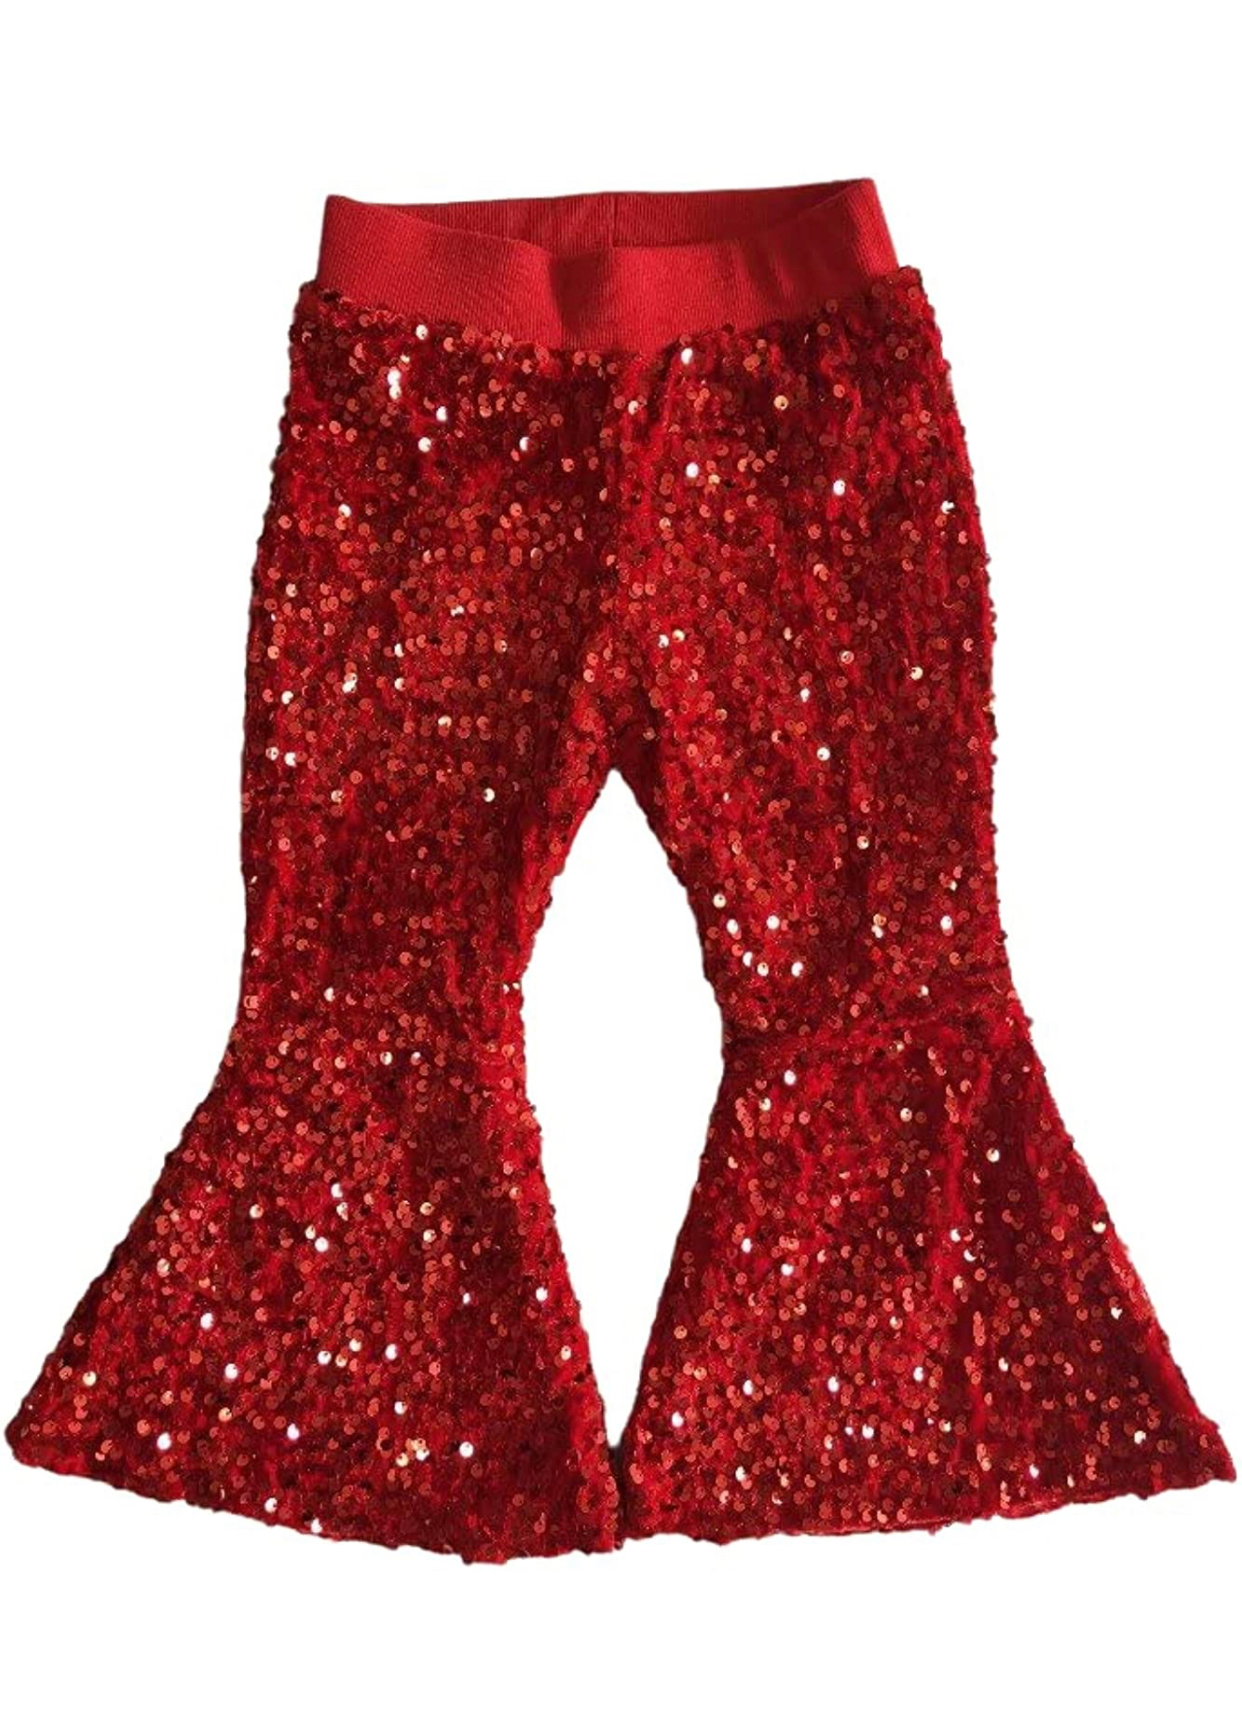 Infant Red Sequin Pants